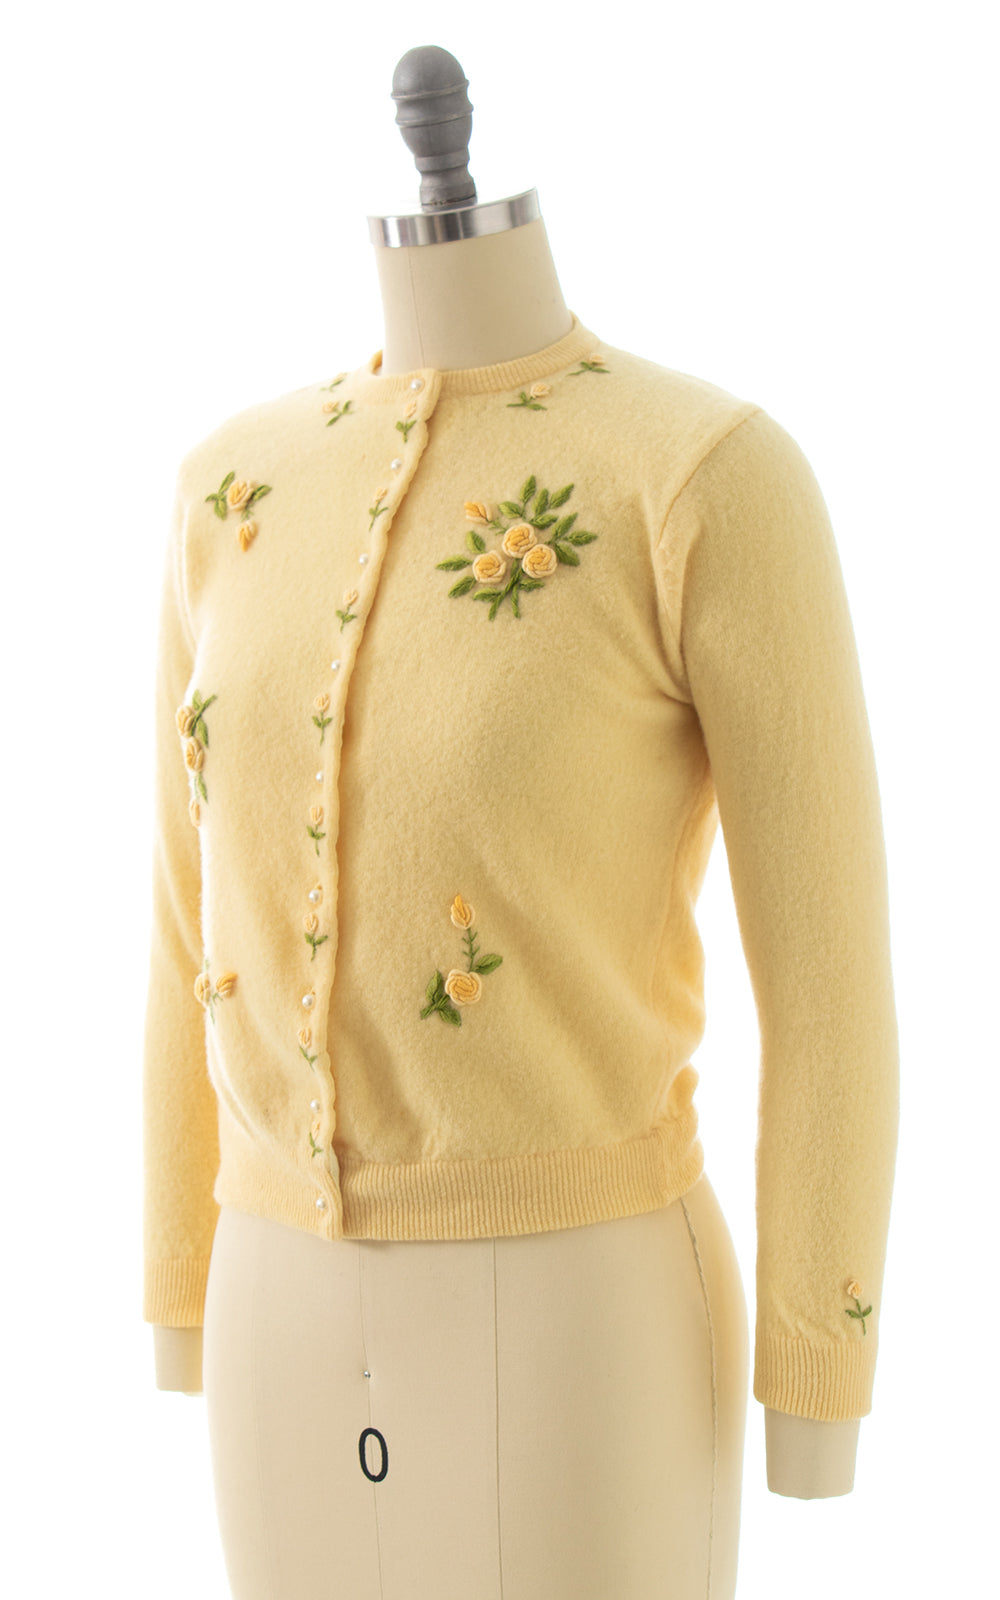 1950s Rose Embroidered Cashmere Cardigan | x-small/small